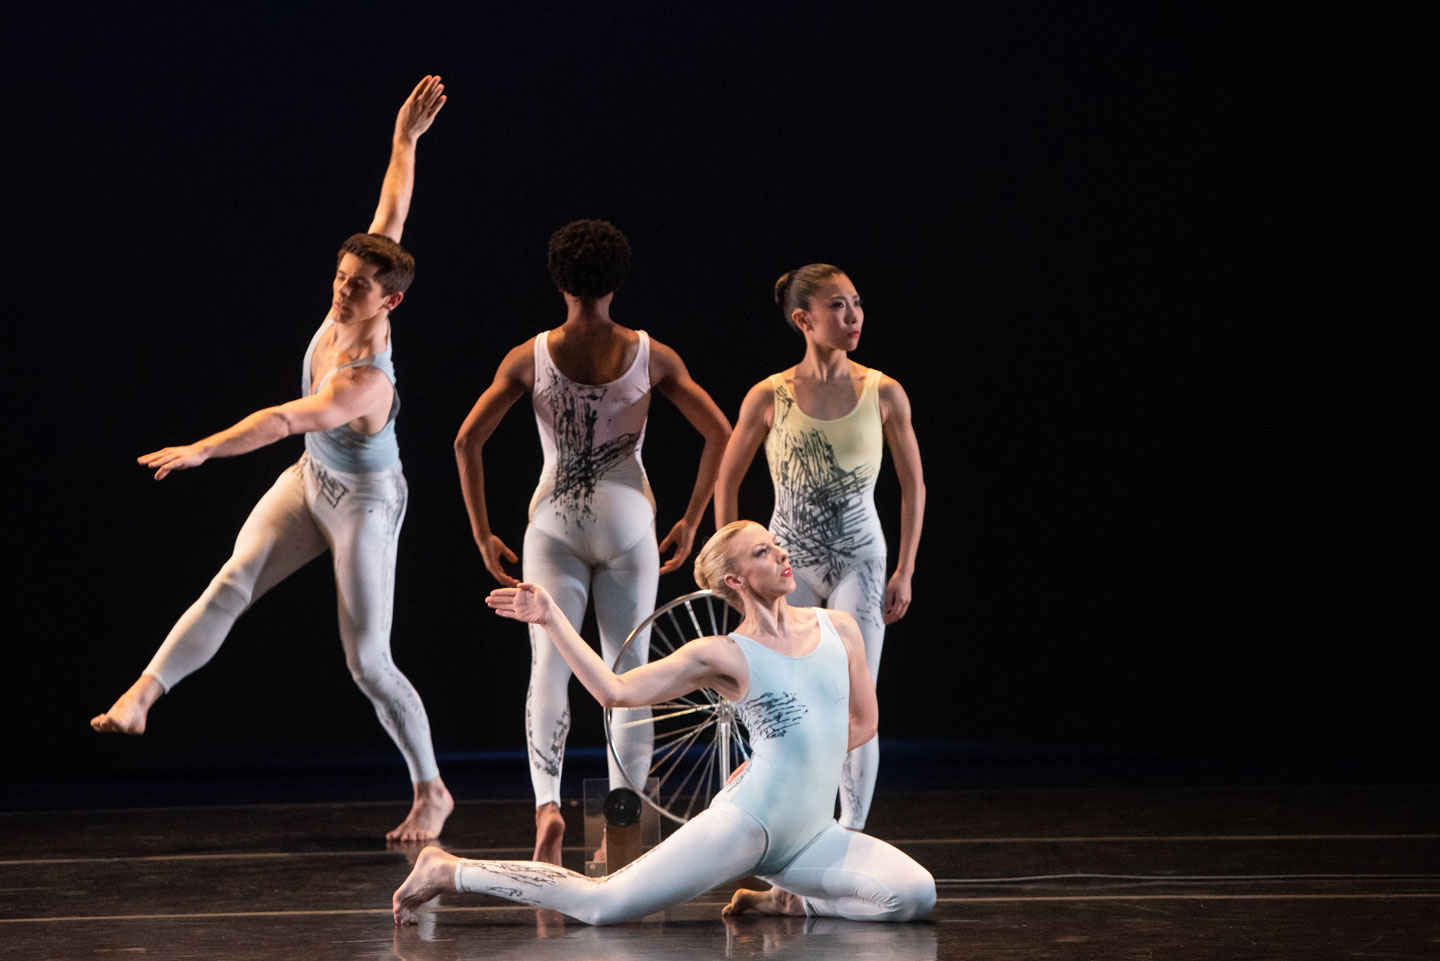 Four Taylor 2 Dance dancers perform on stage at Lafayette College's Williams Center for the Arts.